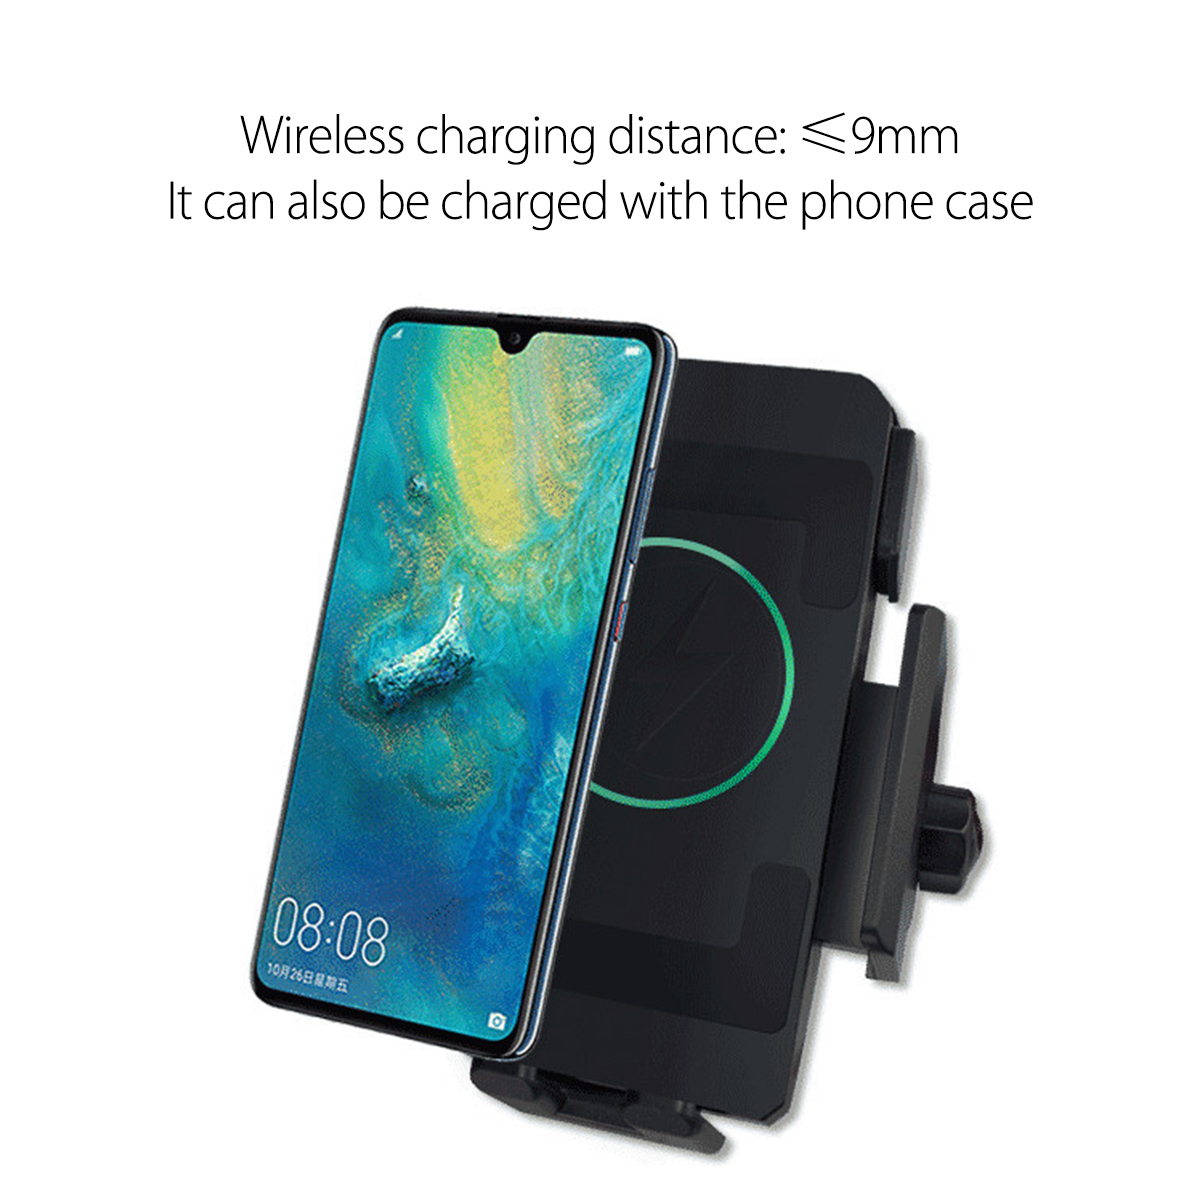 Motorbike-10W-Qi-Wireless-Charger-Fast-Charging-Motorcycle-Phone-Holder-For-45-inch-71-inch-Smart-Ph-1532907-5